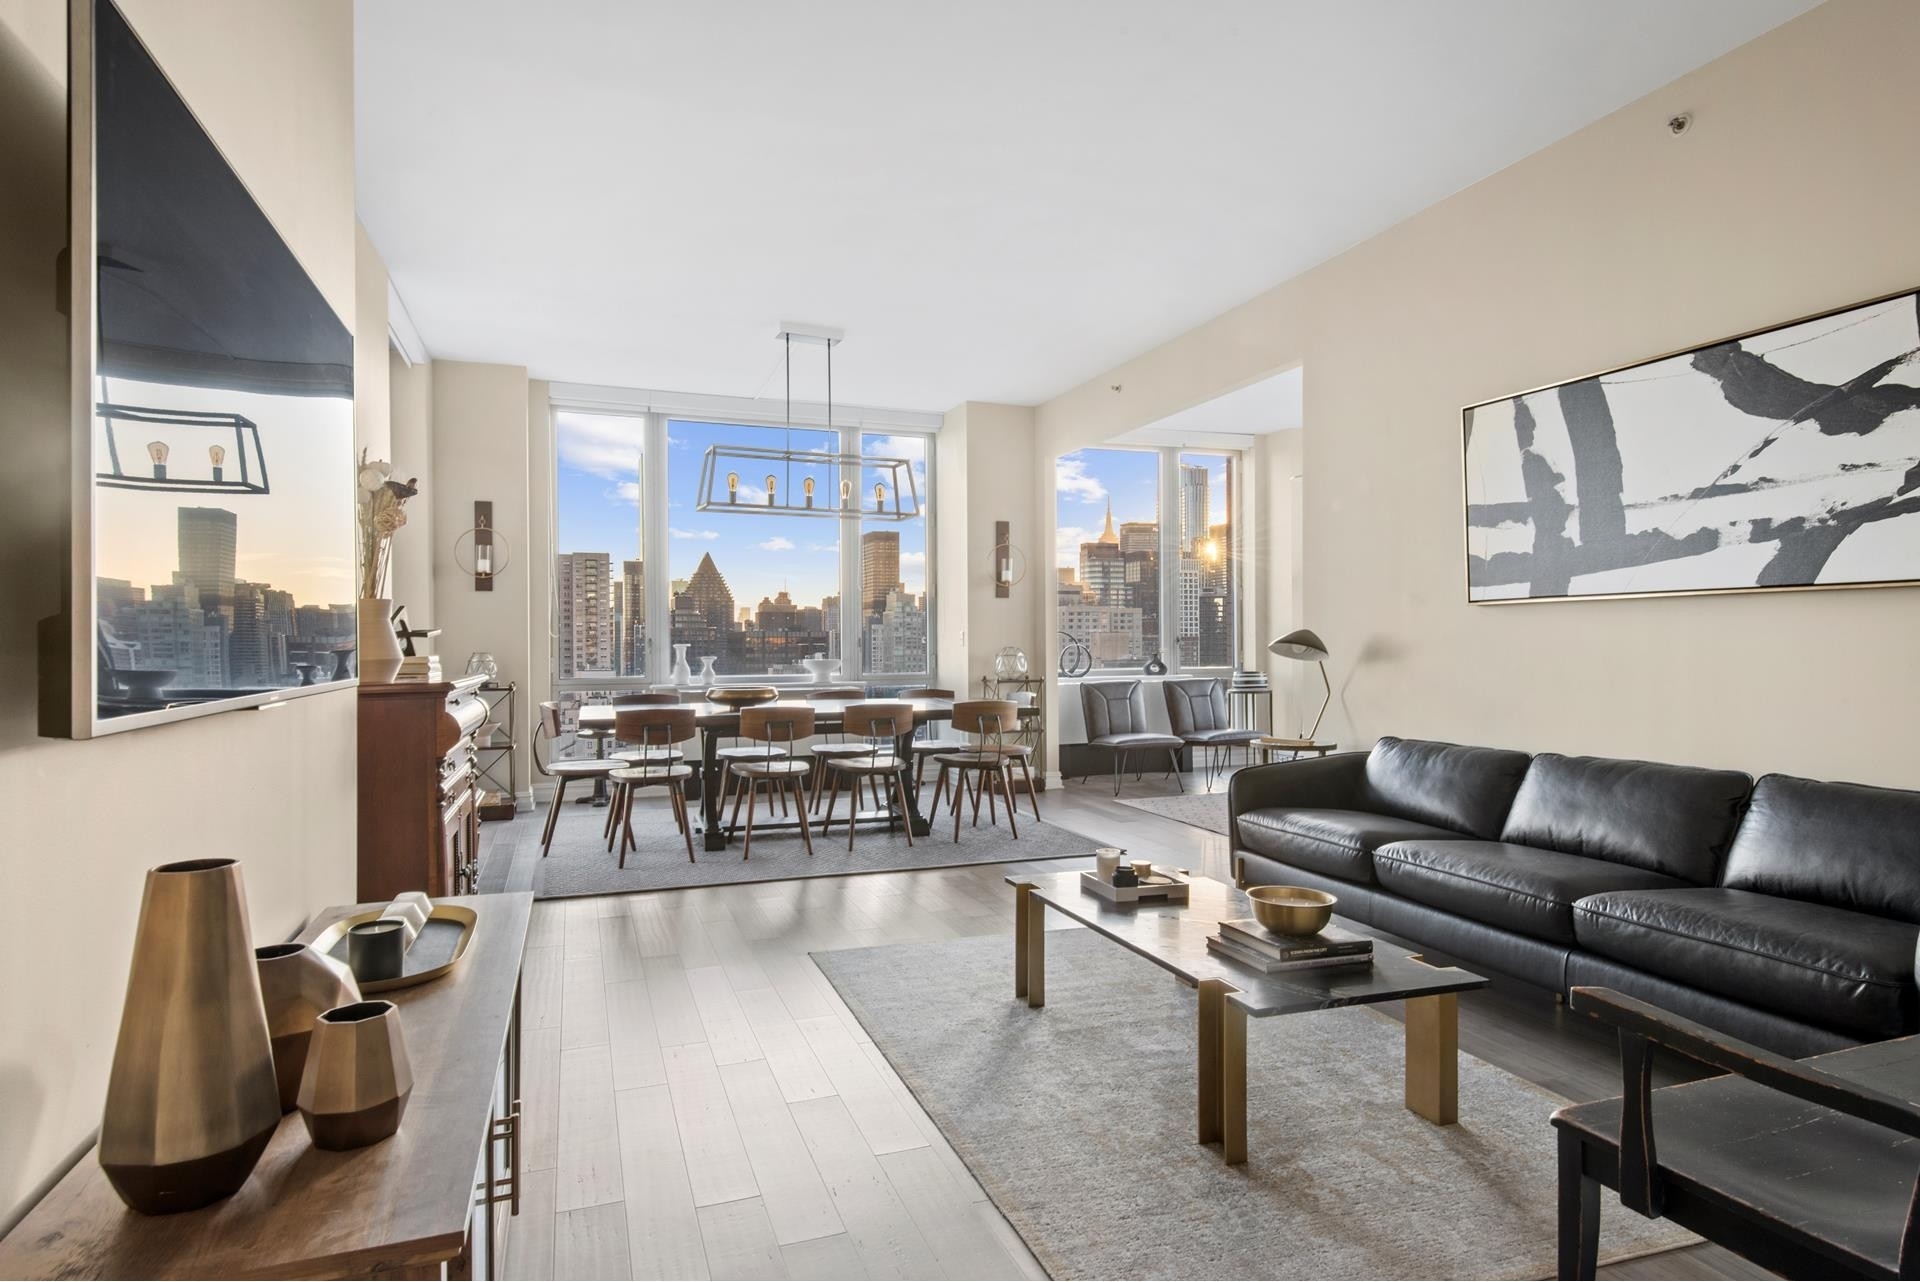 1. Condominiums for Sale at 401 E 60TH ST, 26A Lenox Hill, New York, NY 10065